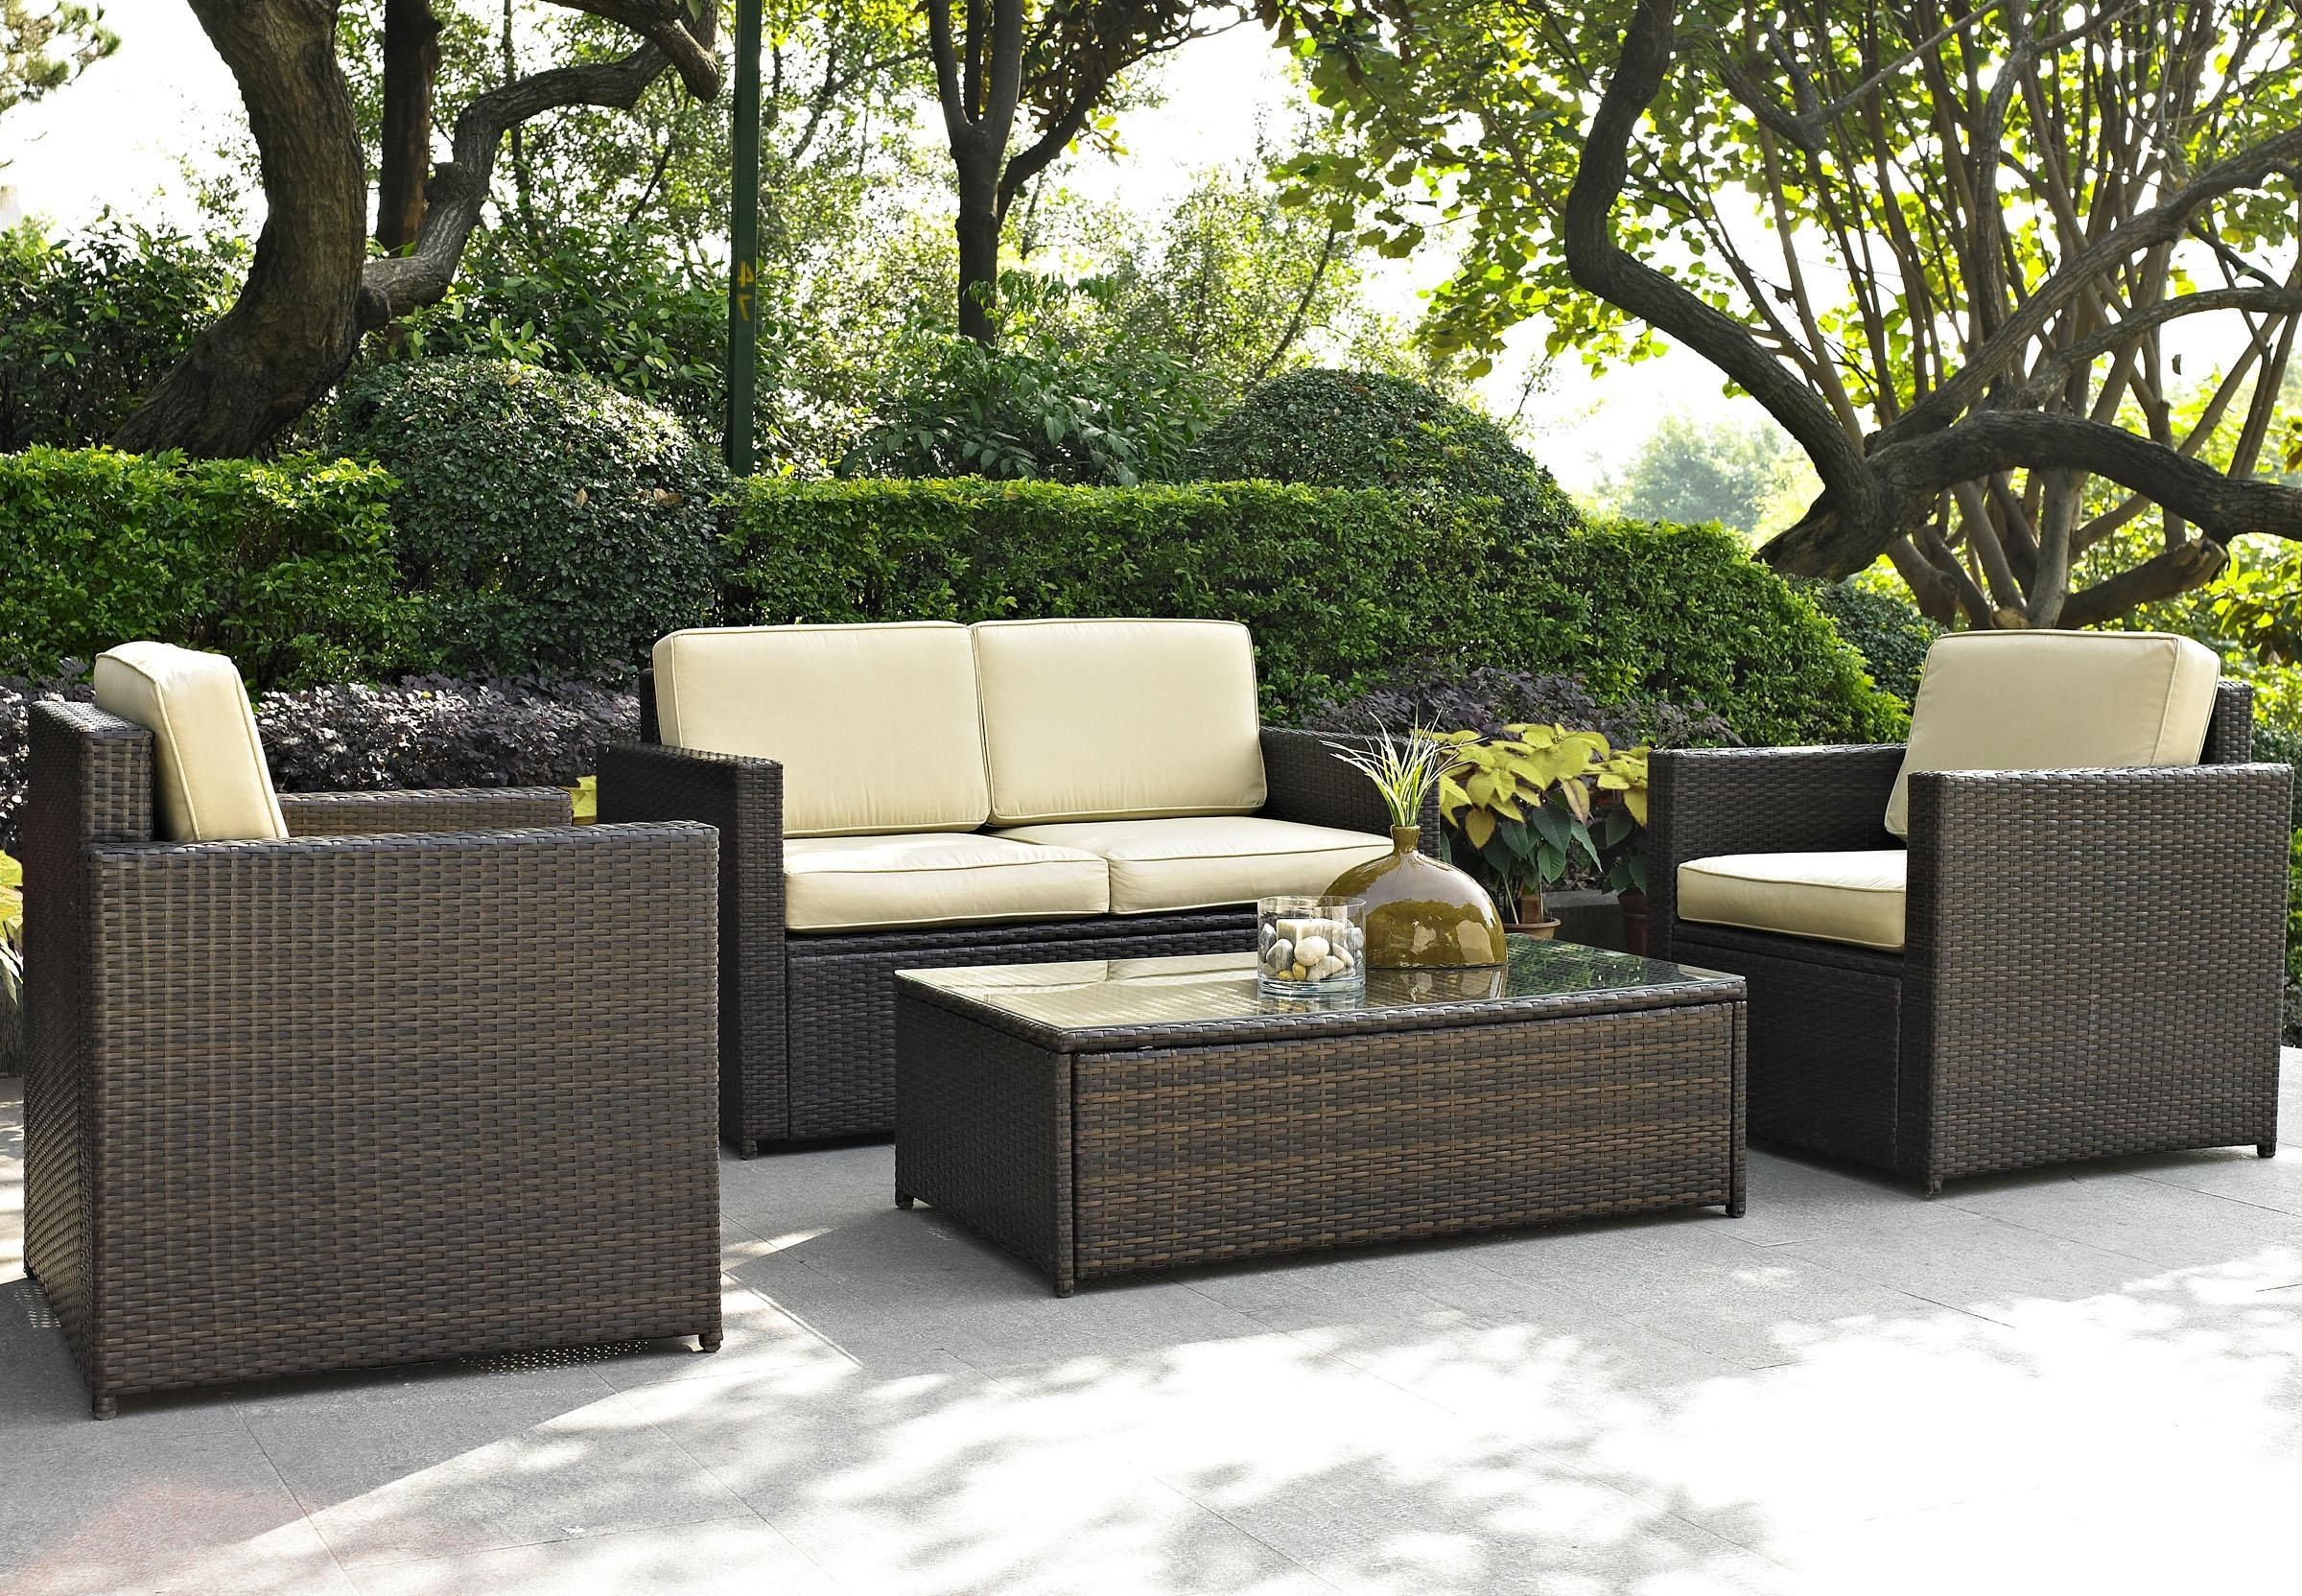 Furniture: Lovely Brown Wicker Chair Outdoor Furniture Design Inside Well Liked Patio Conversation Sets At Target (View 4 of 15)